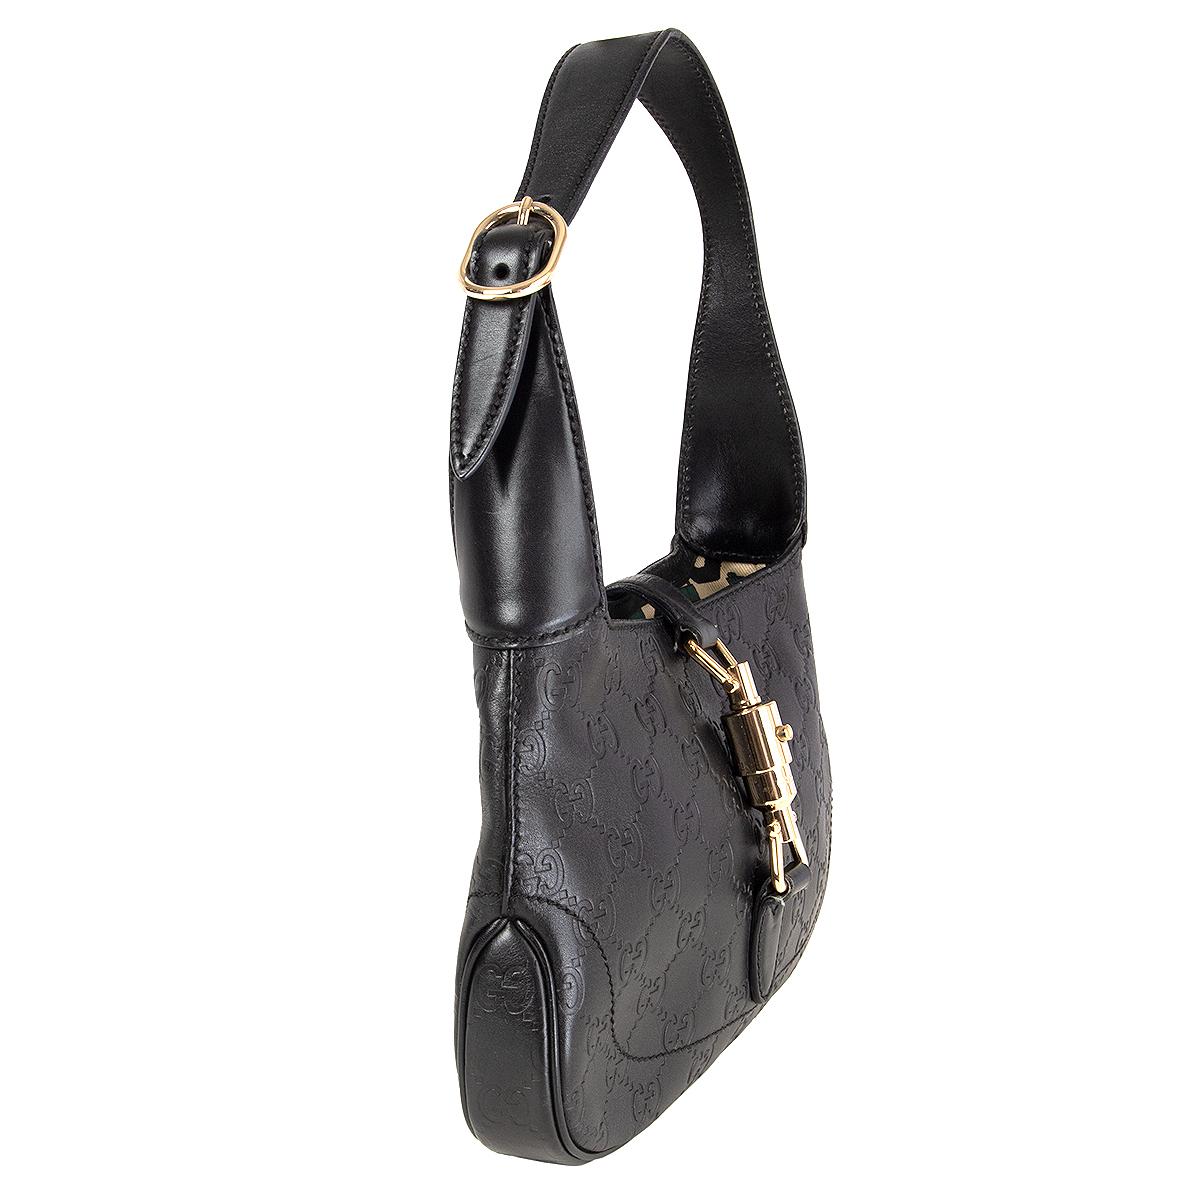 Gucci 'Jackie O' mini bag in black Guccissima calfskin featuring a round light gold-tone closure. Lined in horsebit printed canvas with one zipper pocket against the back. Has been carried with some faint scratches to the hardware. Overall in